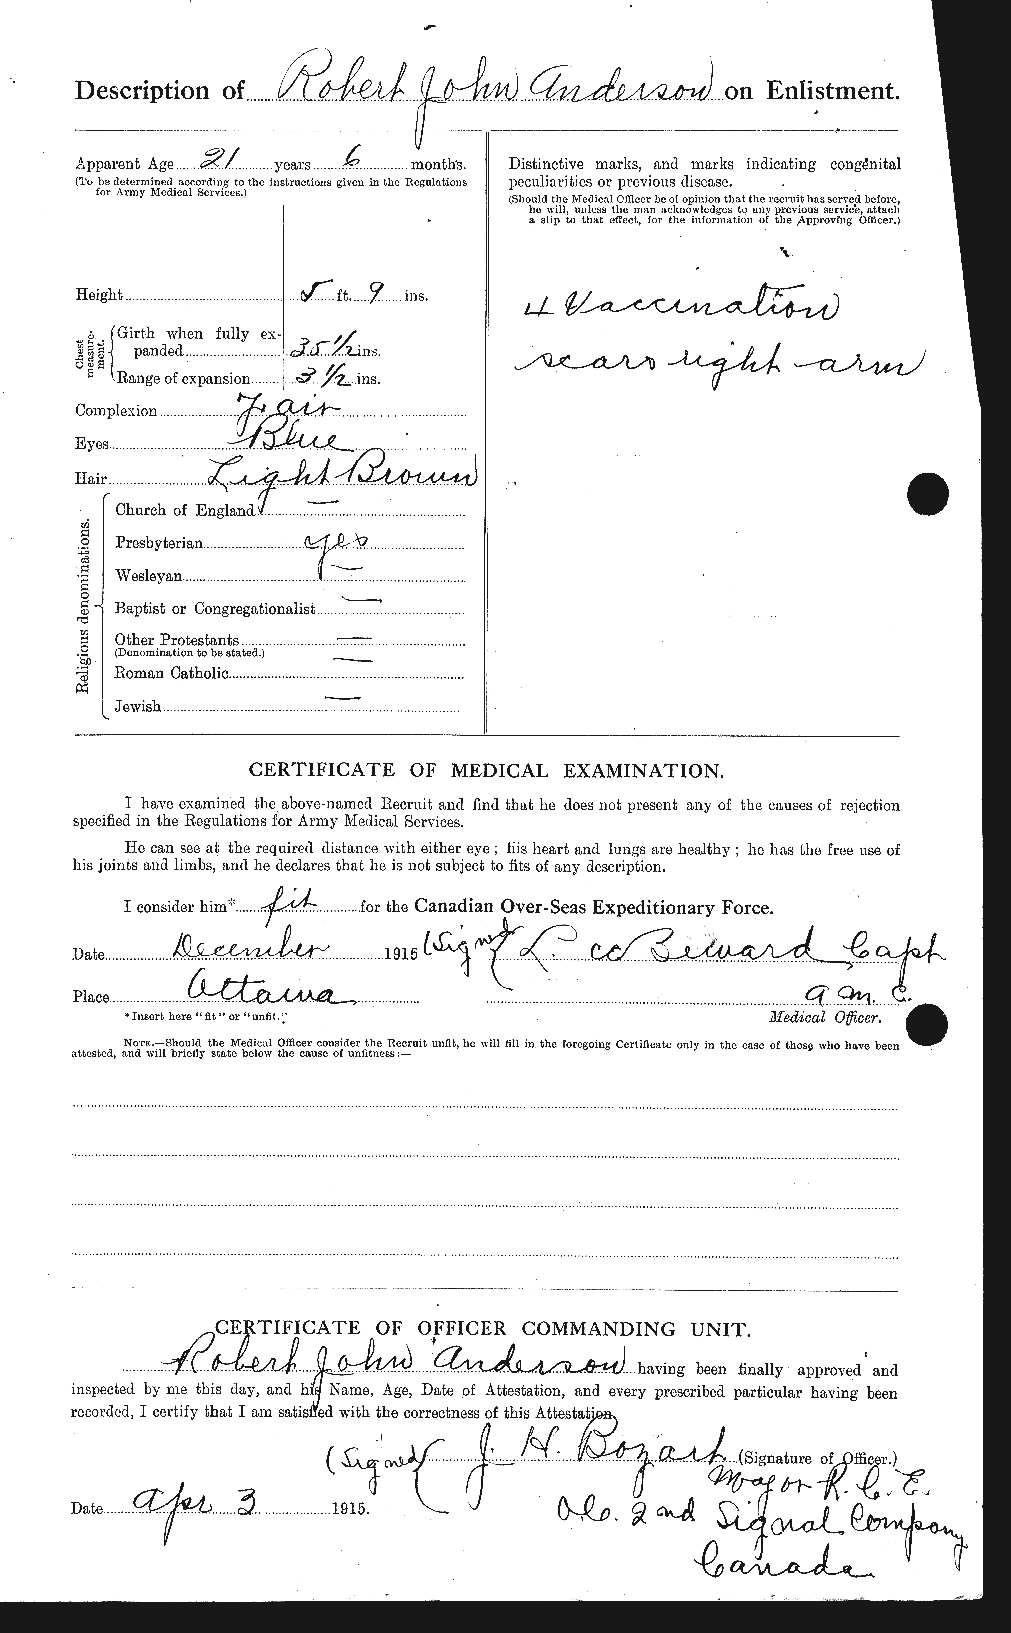 Personnel Records of the First World War - CEF 207240b